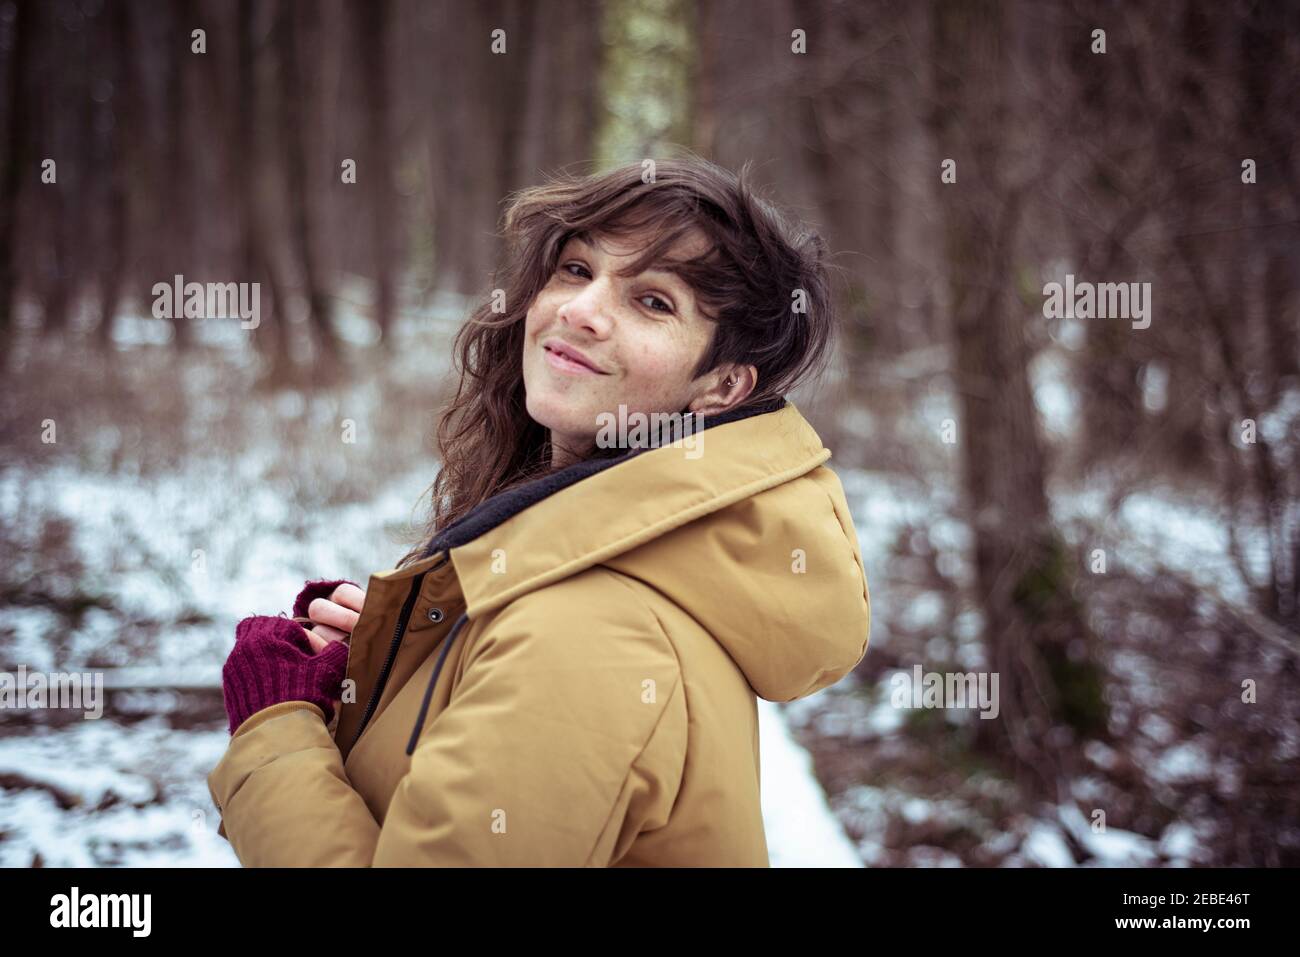 cheerful woman smiles cheekily over shoulder in snowy winter forrest Stock Photo